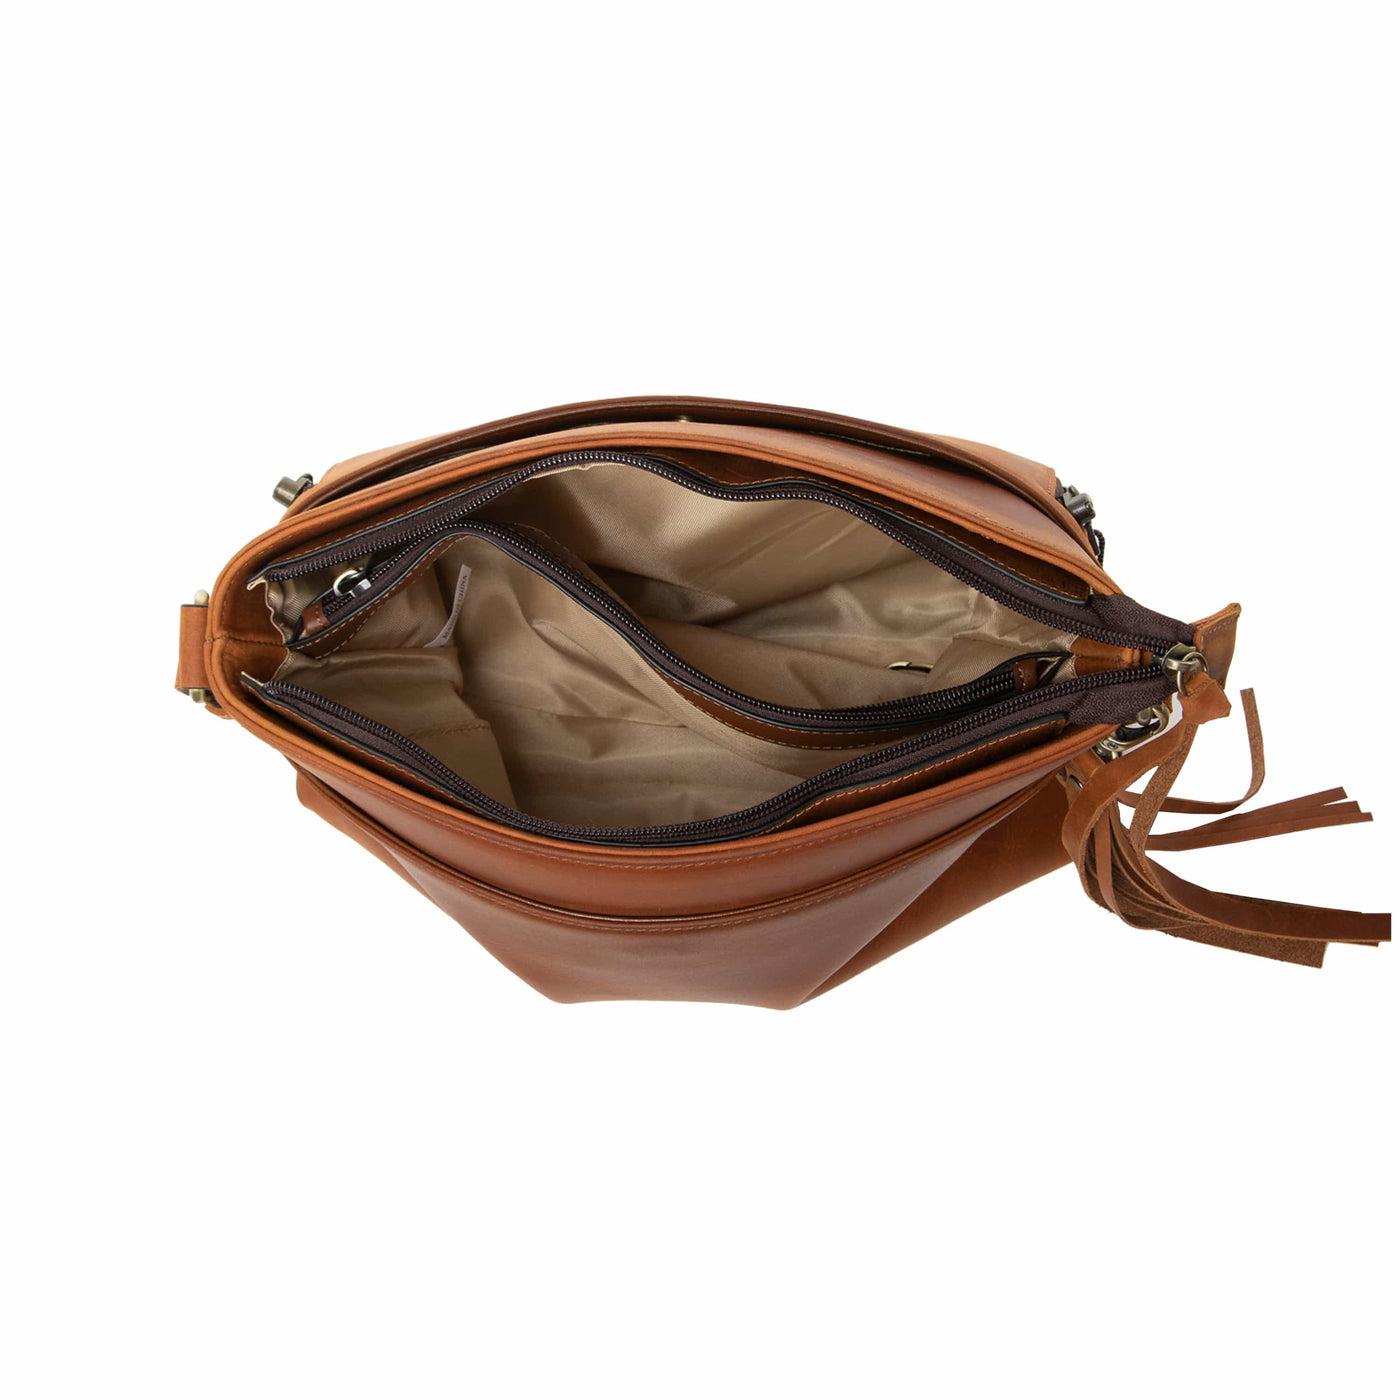 Concealed Carry Josie Leather Crossbody -  Lady Conceal -  Concealed Carry Purse -   soft leather shoulder bags for women's -  crossbody bags for everyday use -  most popular crossbody bag -  crossbody bags for guns -  crossbody handgun bag -  Unique Hide Purse -  Conceal Carry Western Purse -  Stylish Carry Josie Leather Bag -  Bag for Conceal Carrying Women - Gun Bag for Women